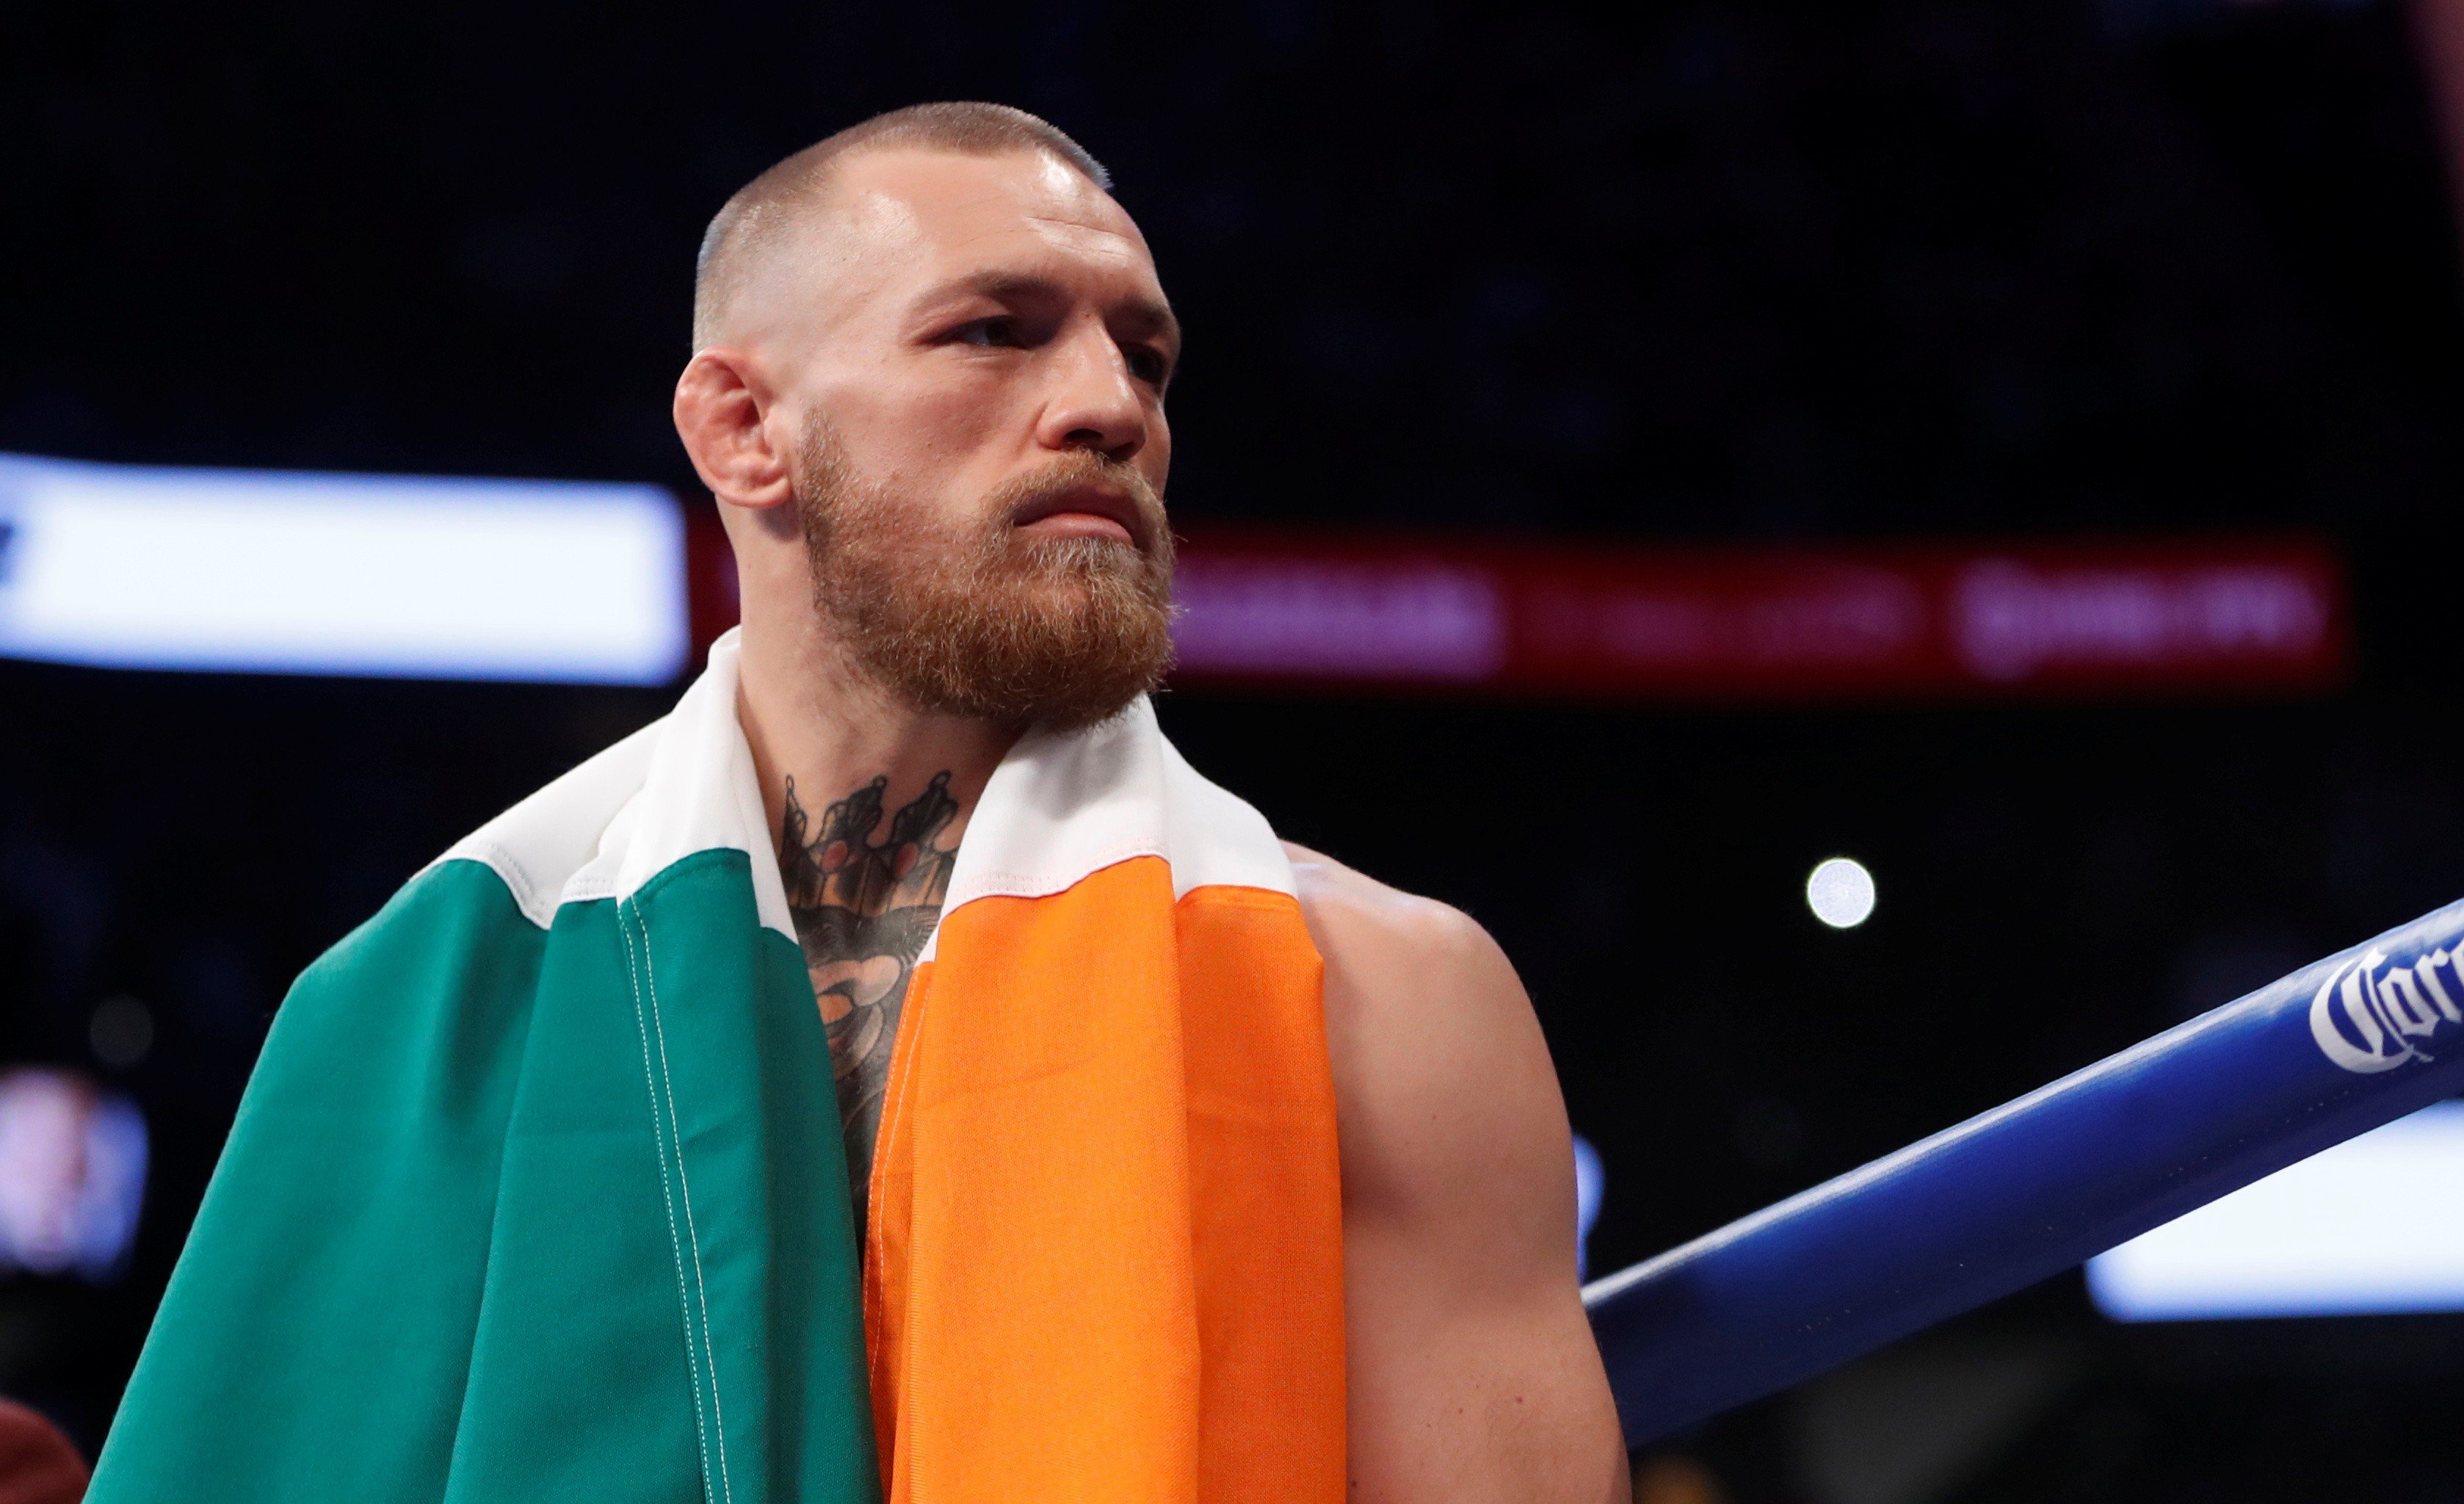 While better known as an MMA fighter, Conor McGregor famously entered the boxing ring for a one off bout with American boxer Floyd Mayweather Jr. in 2017 – which he lost in the 10th round. Photo: Reuters